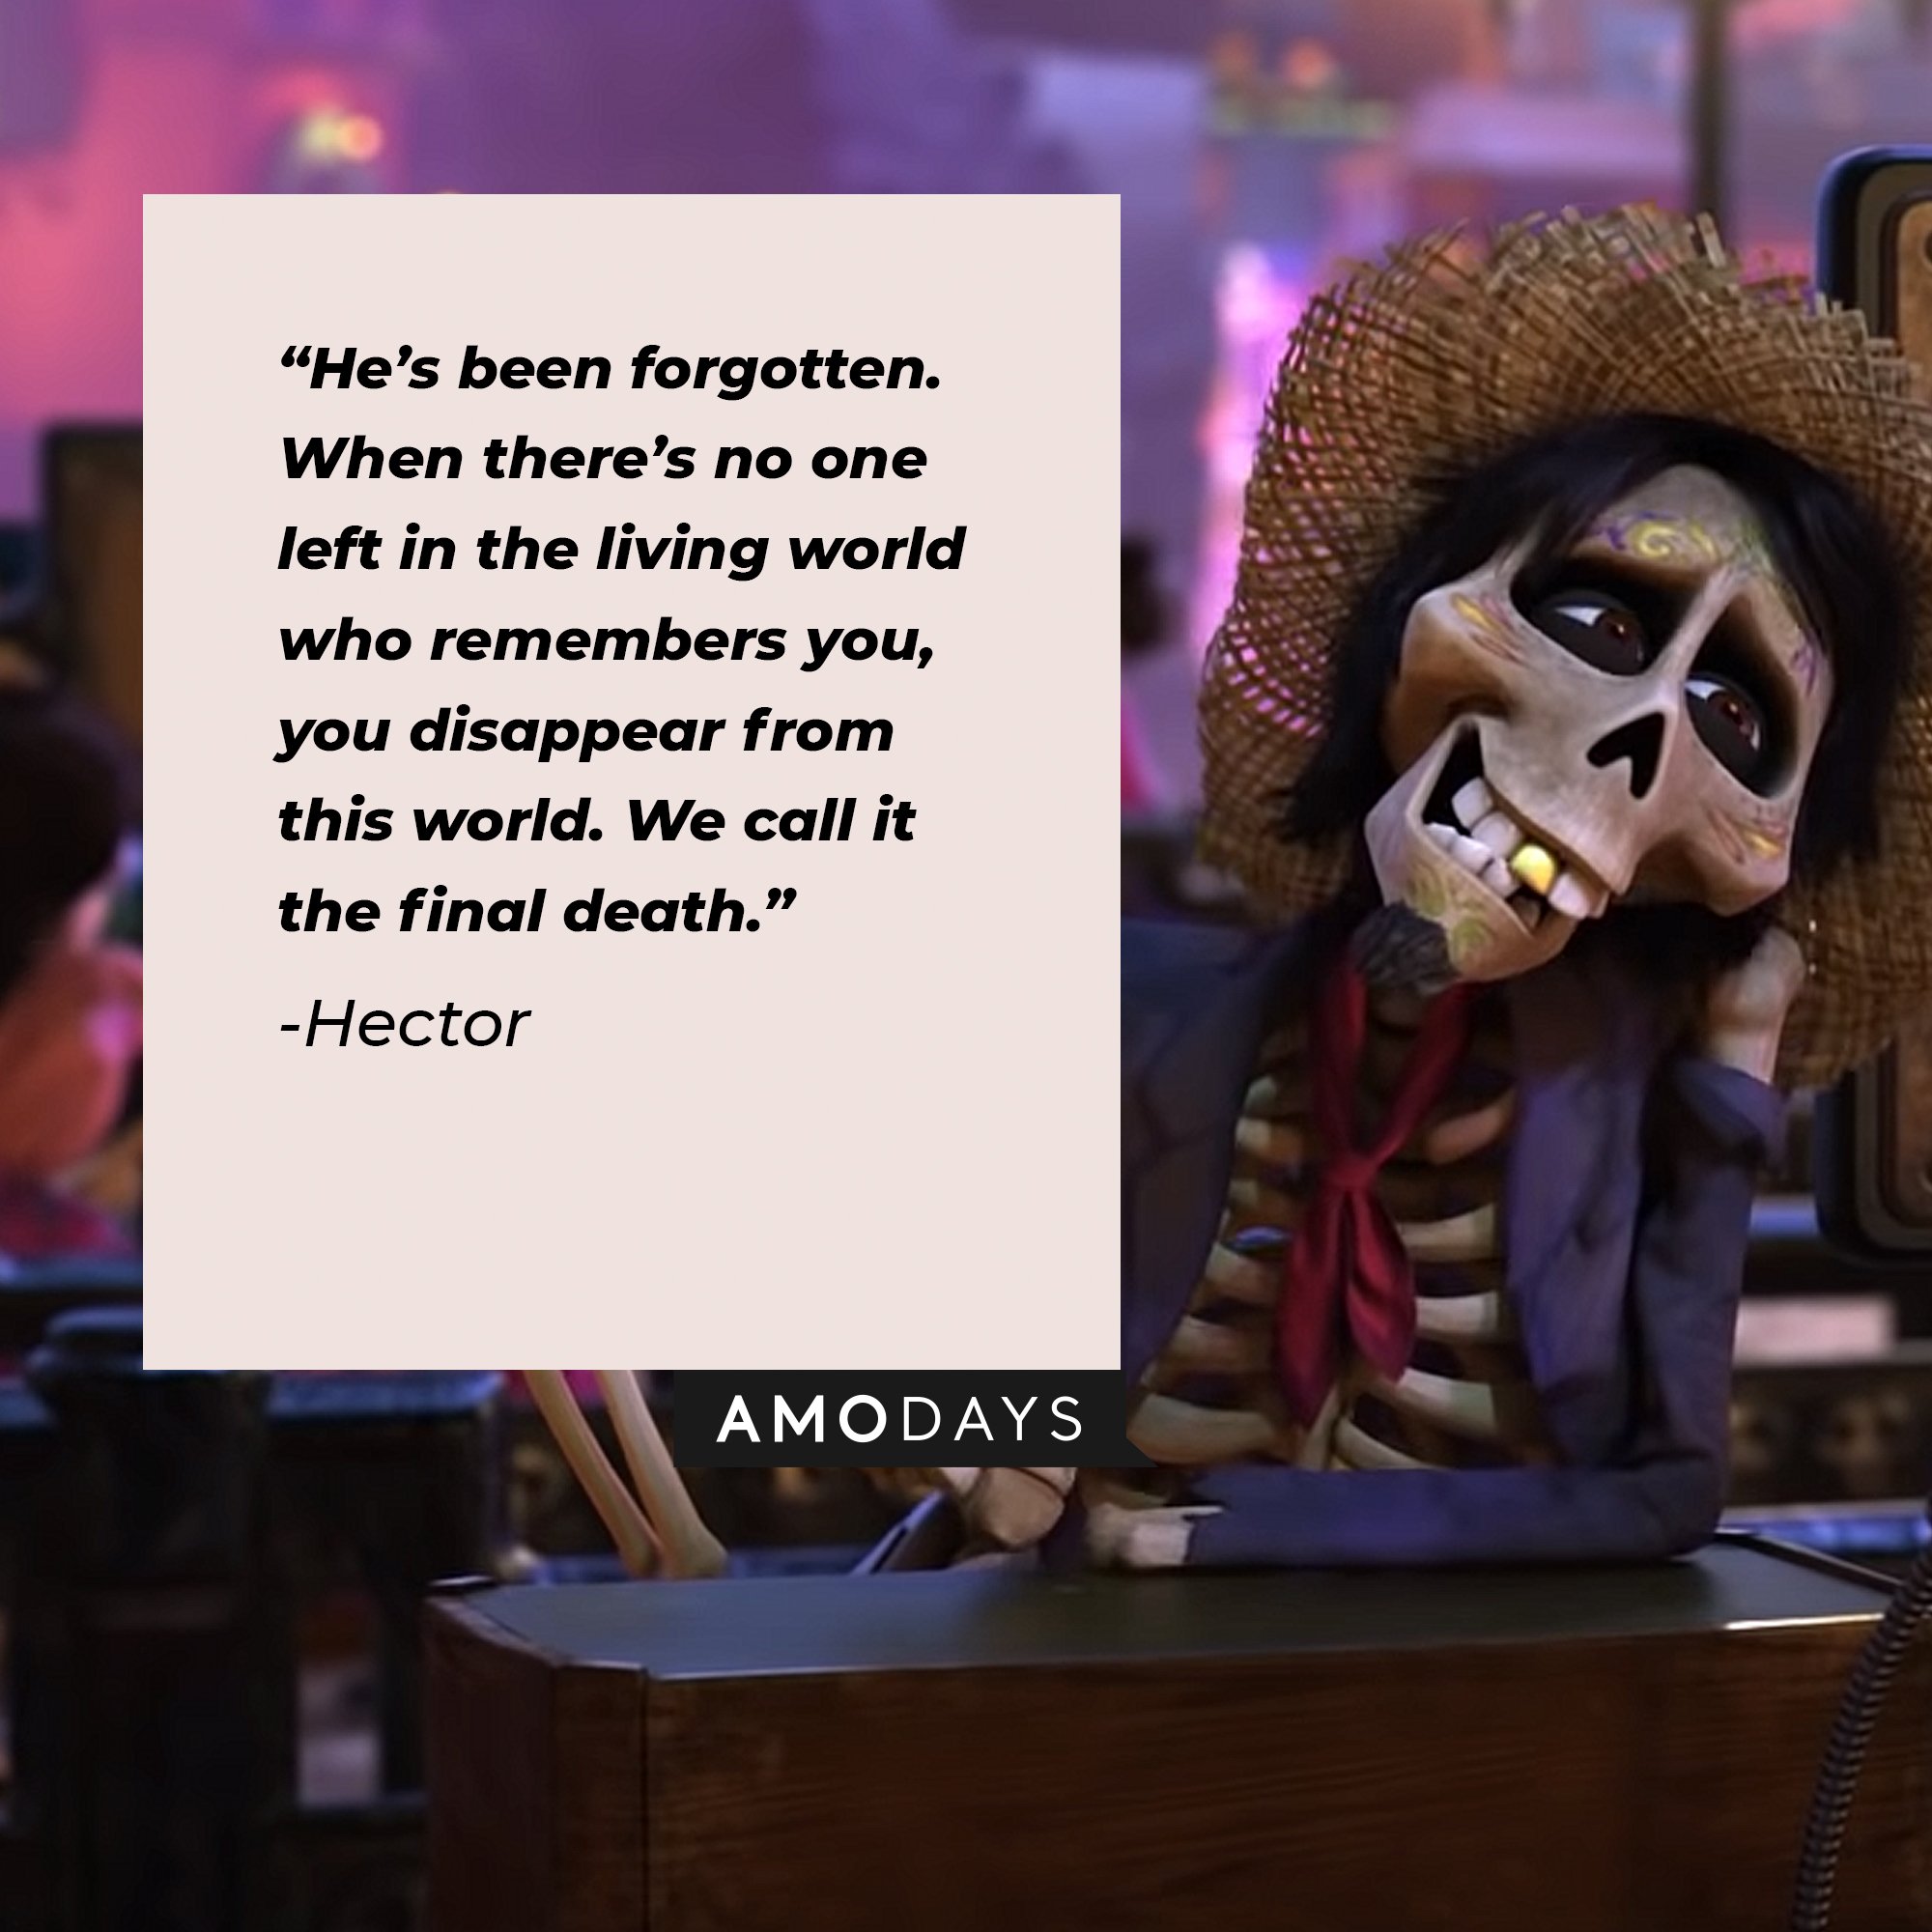  Hector's quote: “He’s been forgotten. When there’s no one left in the living world who remembers you, you disappear from this world. We call it the final death.” | Image: AmoDays